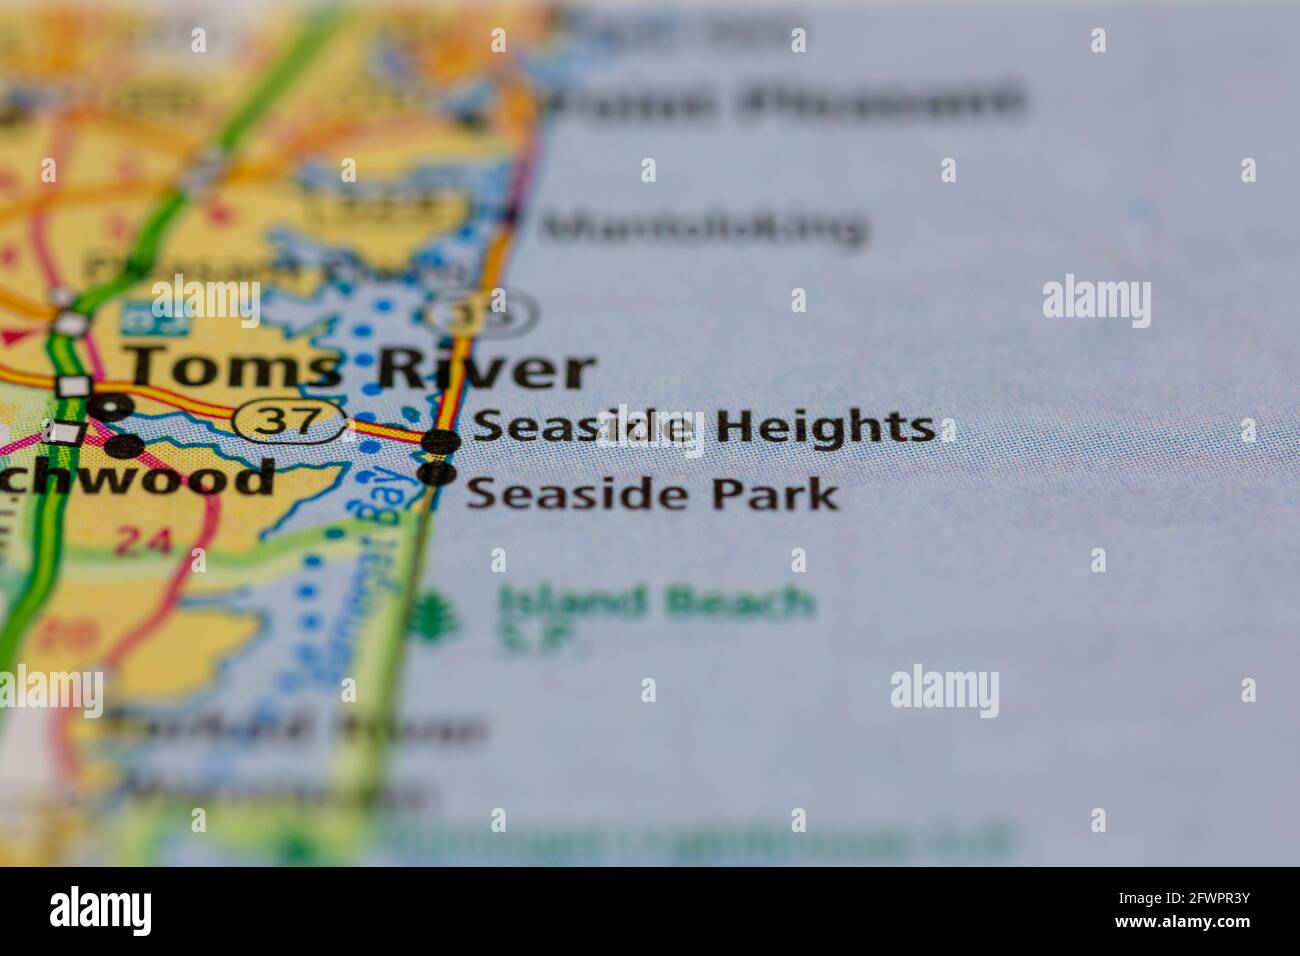 Seaside Heights New Jersey USA shown on a Geography map or road map Stock Photo